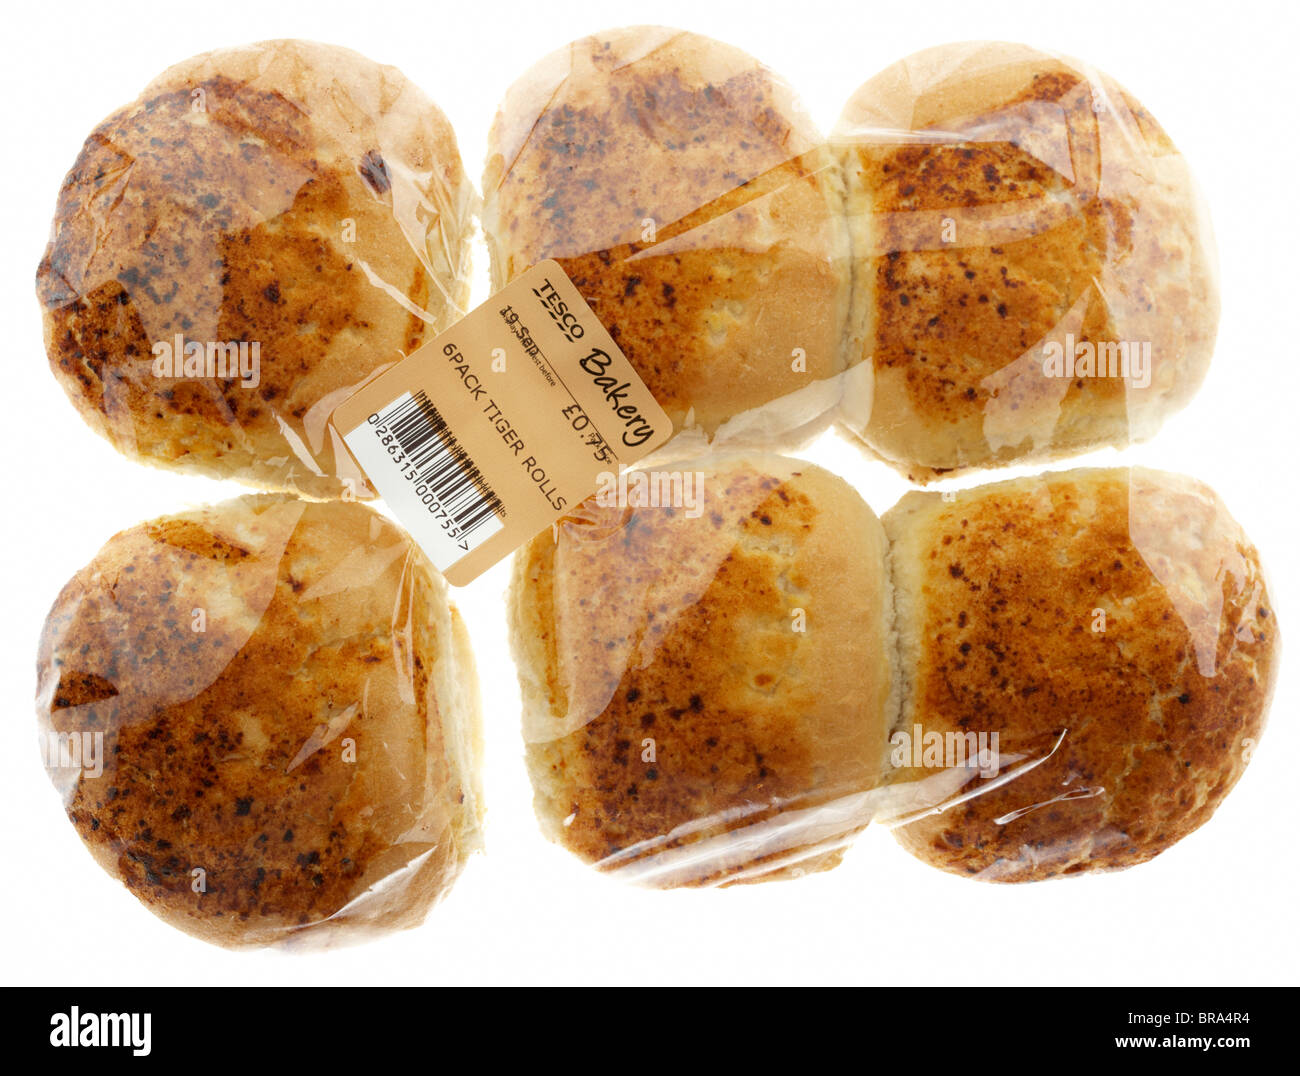 six tiger rolls produced by instore bakery in uk supermarket tesco Stock Photo